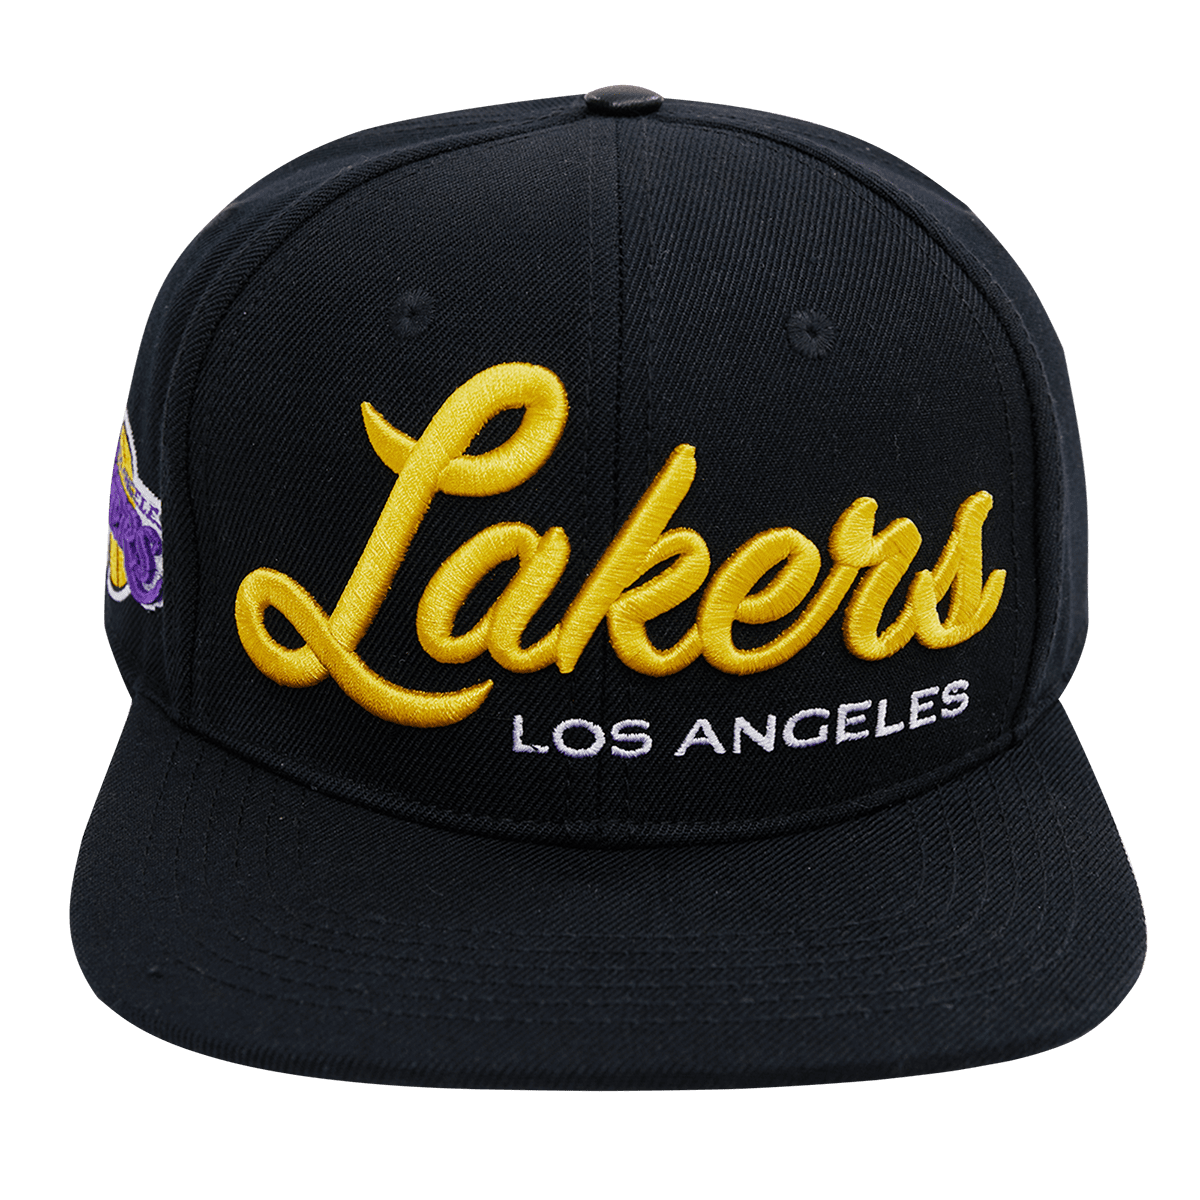 LOS ANGELES LAKERS ROSES SNAPBACK HAT (YELLOW)